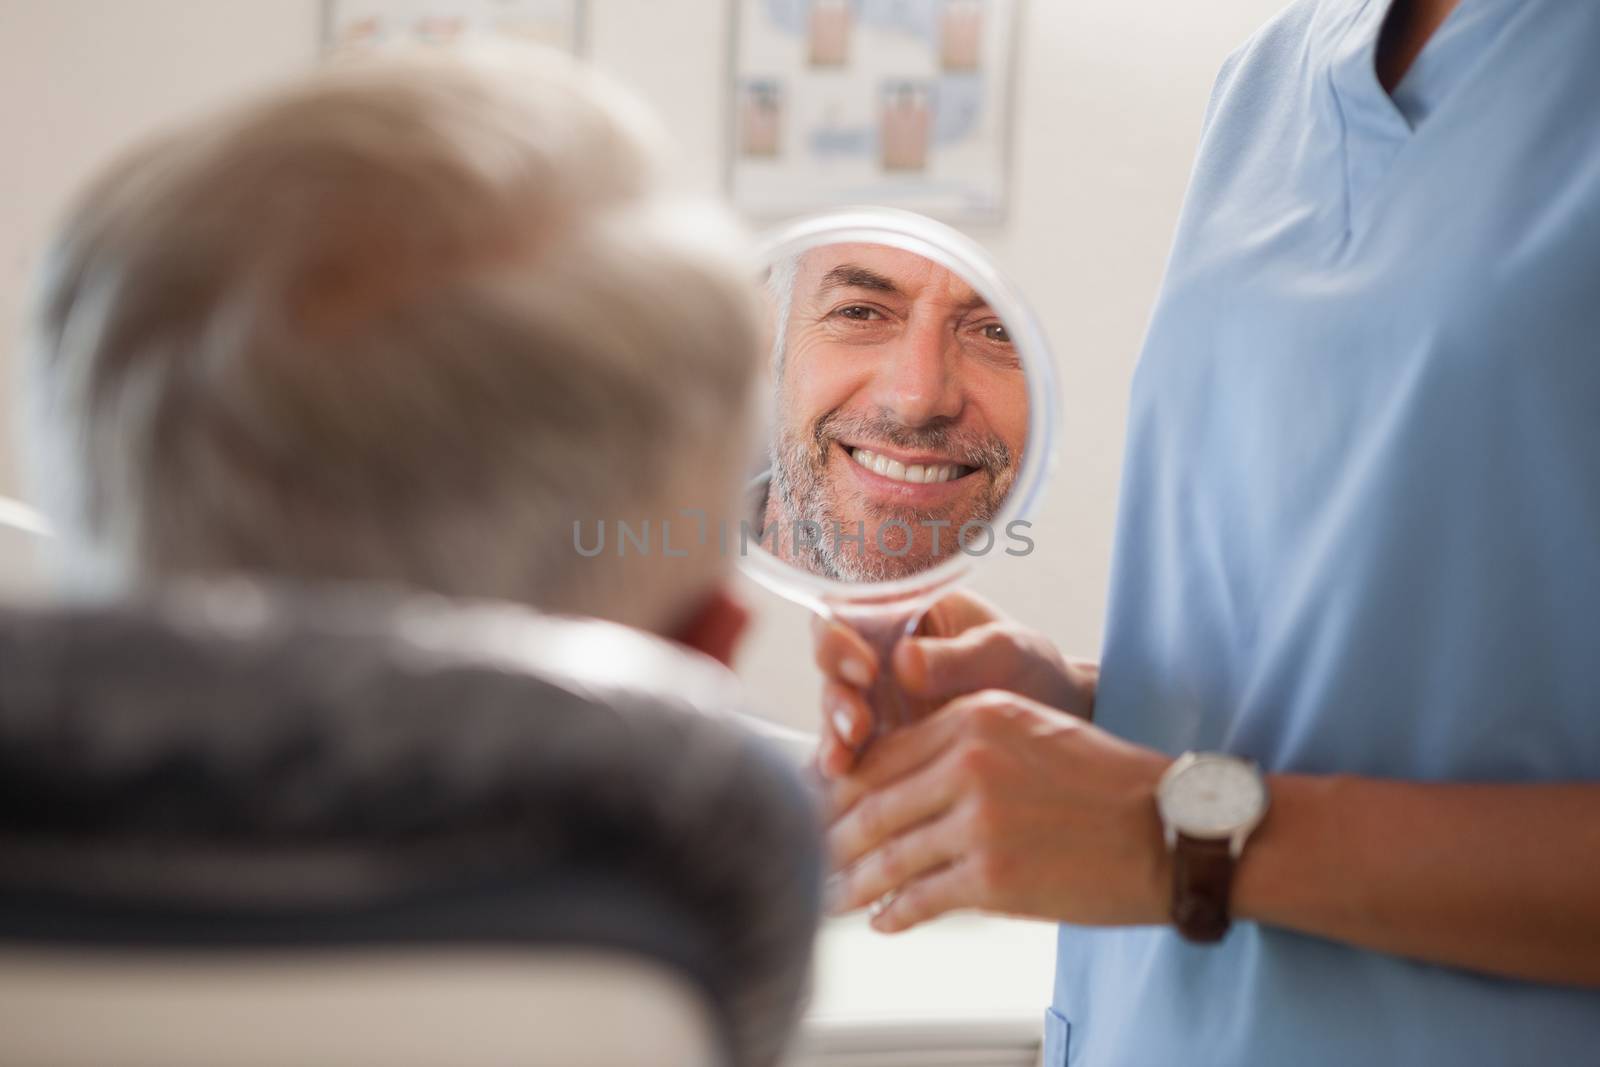 Dentist showing patient his new smile in the mirror at the dental clinic